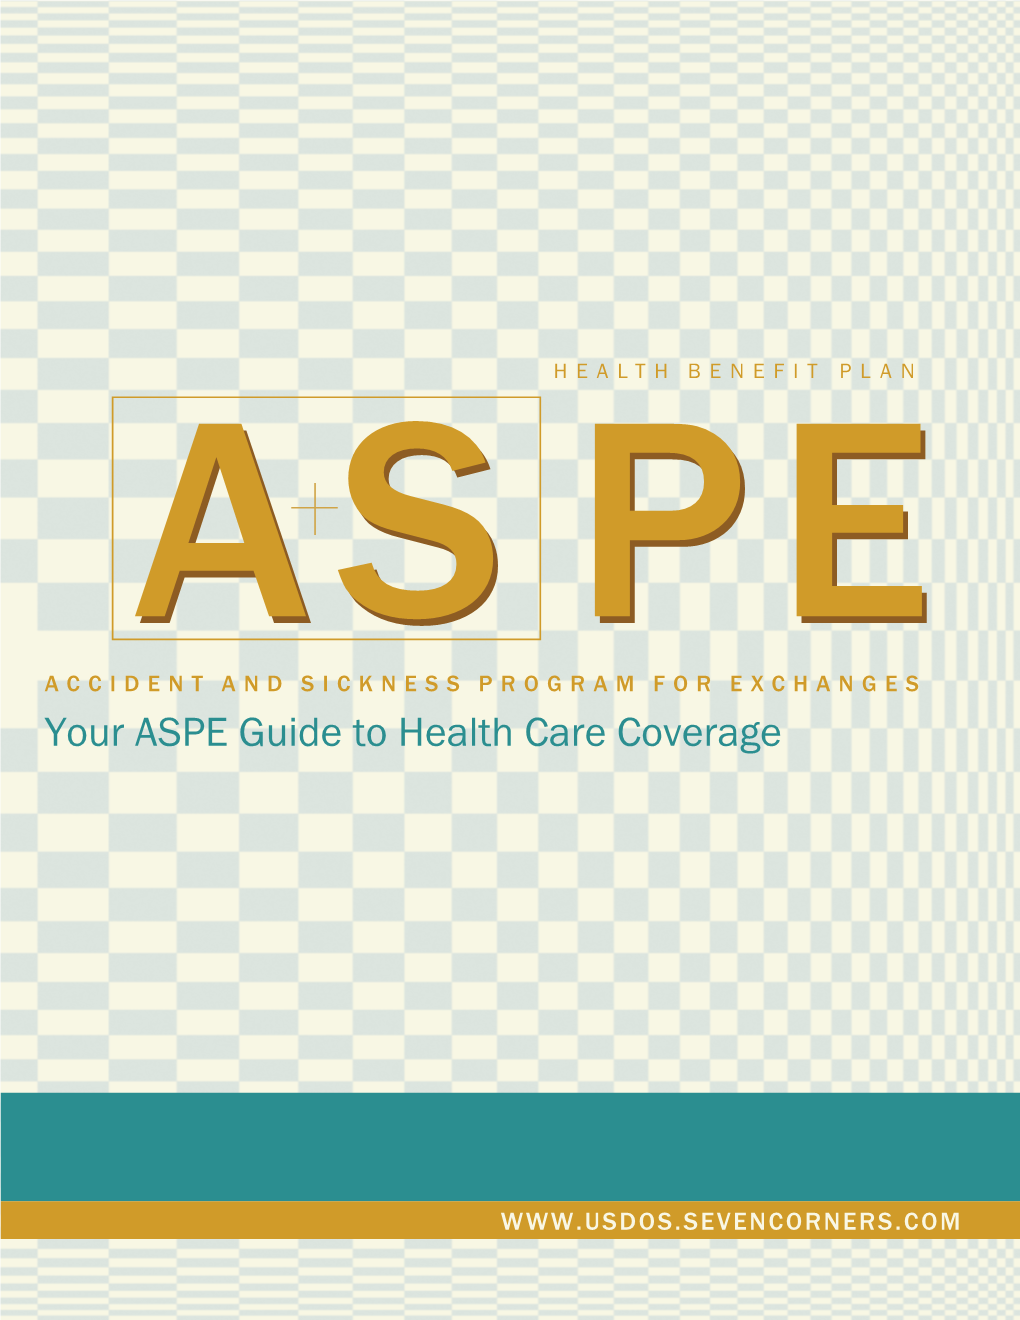 Your ASPE Guide to Health Care Coverage